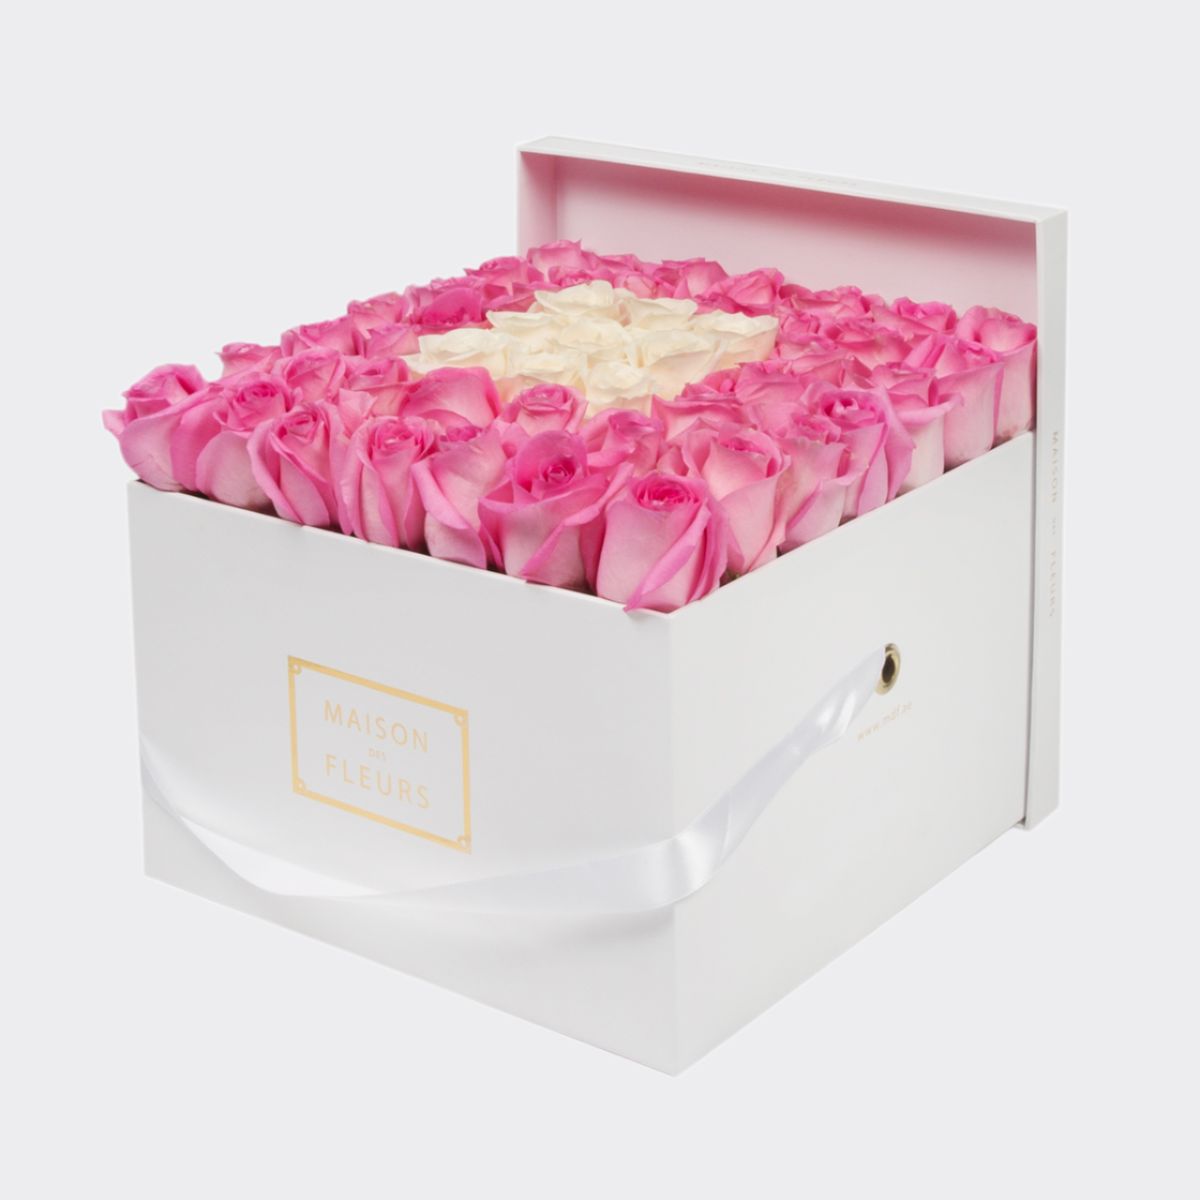 Fresh White & Pink Roses in a Large Square White Box